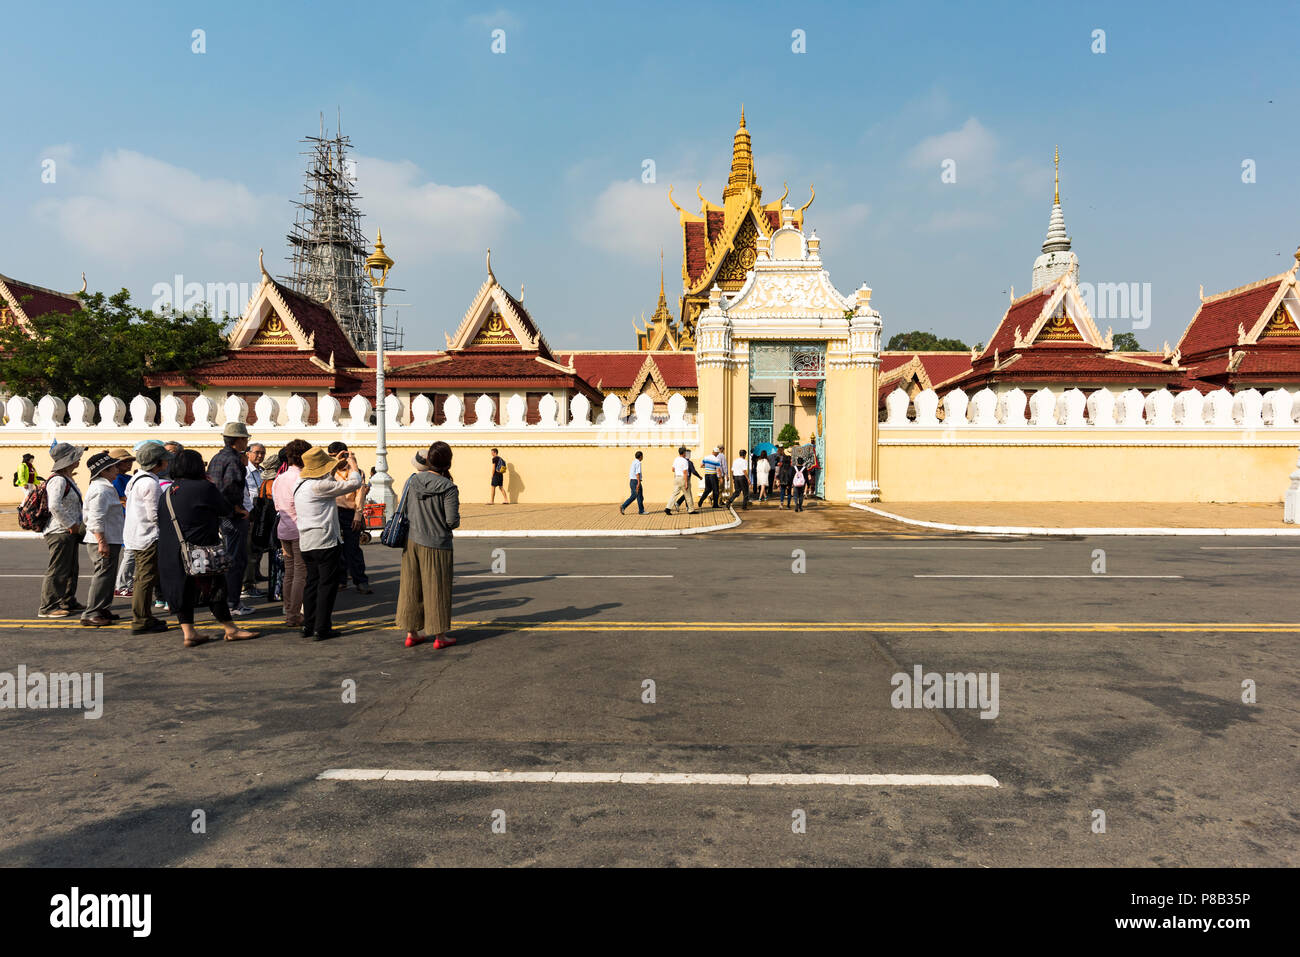 Entrance of The Royal Palace in Phnom Penh with many tourists, Cambodia Stock Photo